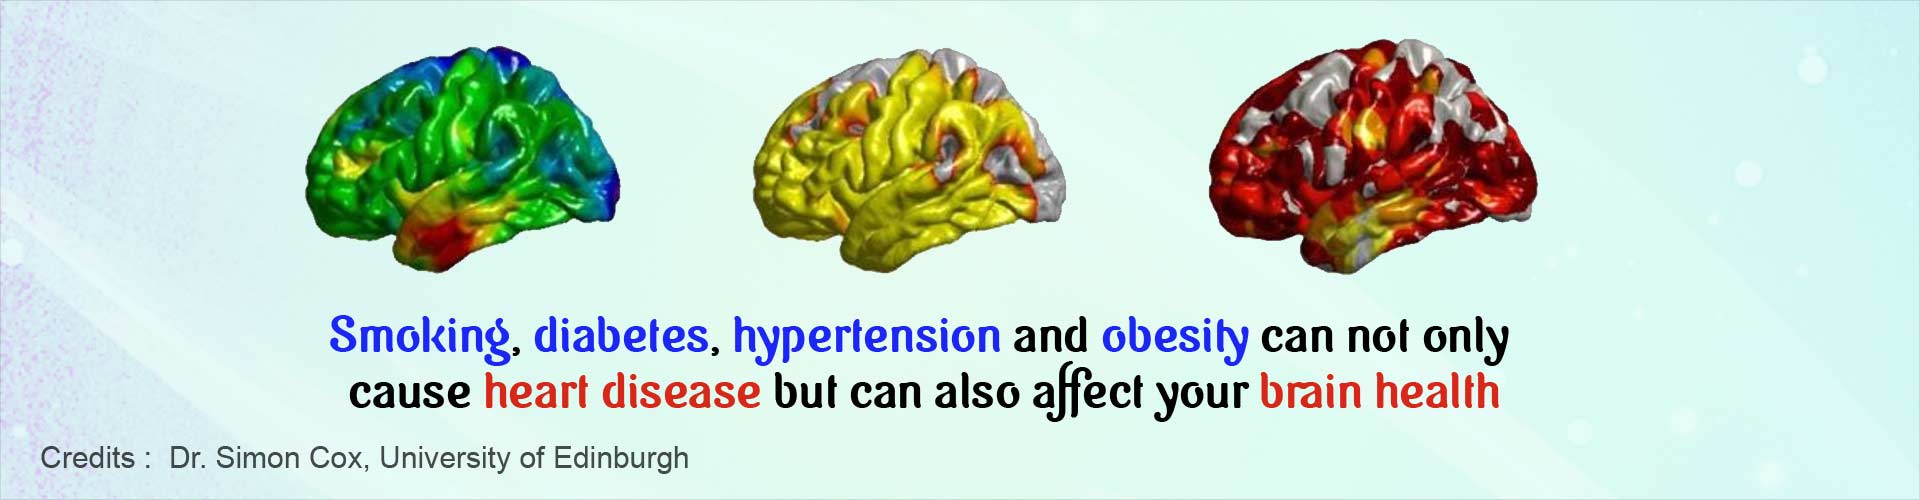 Smoking, diabetes, hypertension and obesity can not only cause heart disease but can also affect your brain health.